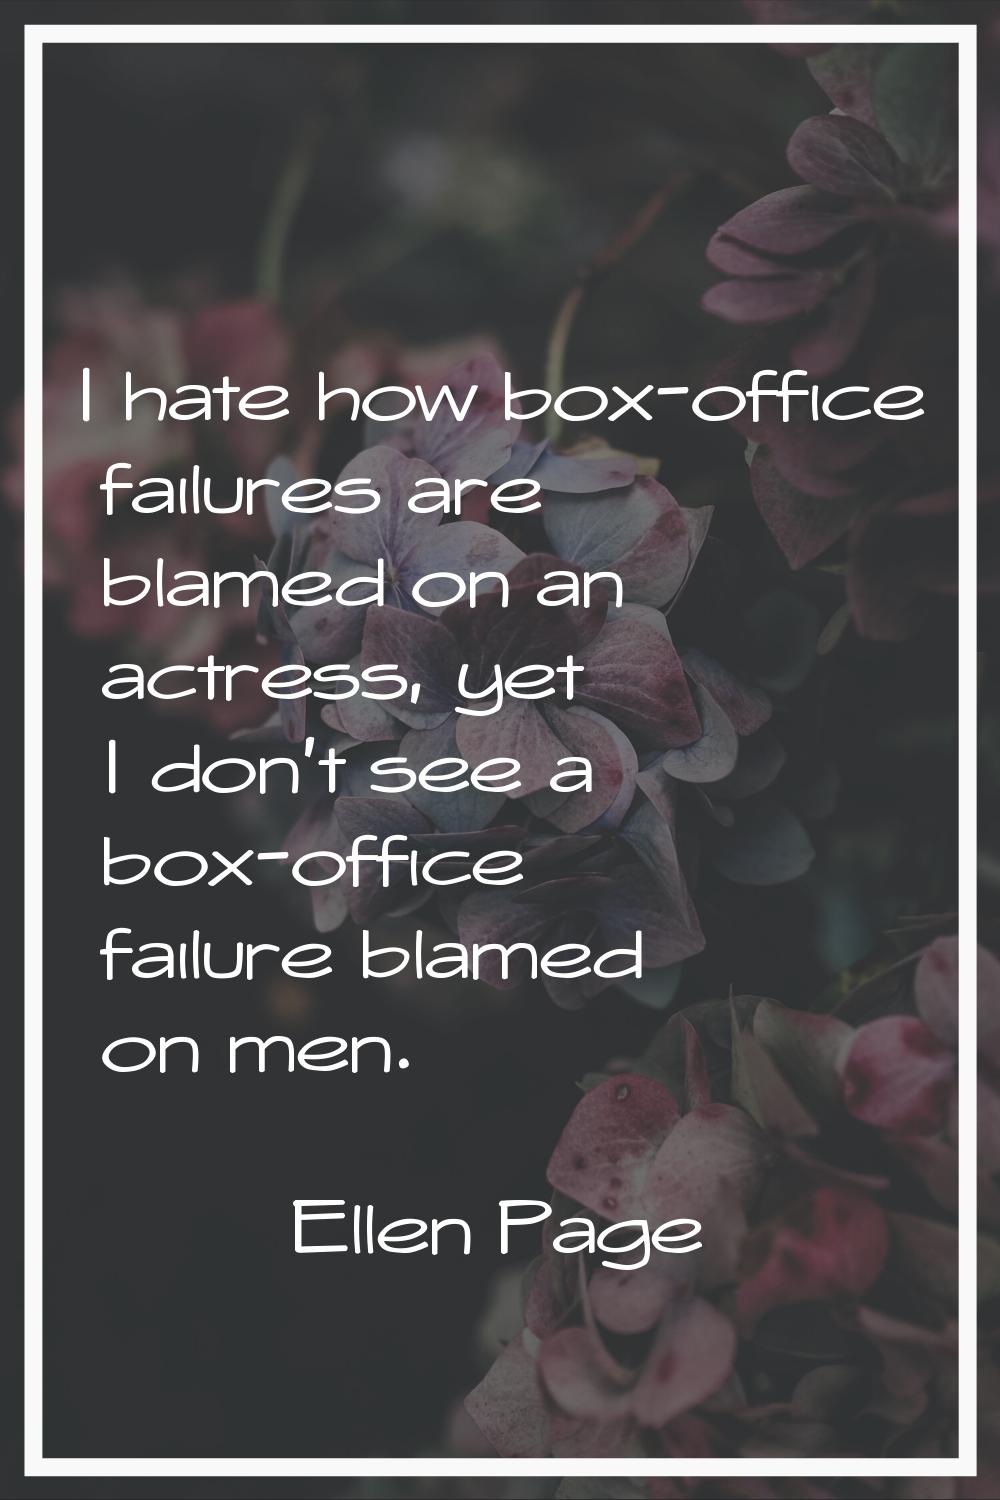 I hate how box-office failures are blamed on an actress, yet I don't see a box-office failure blame